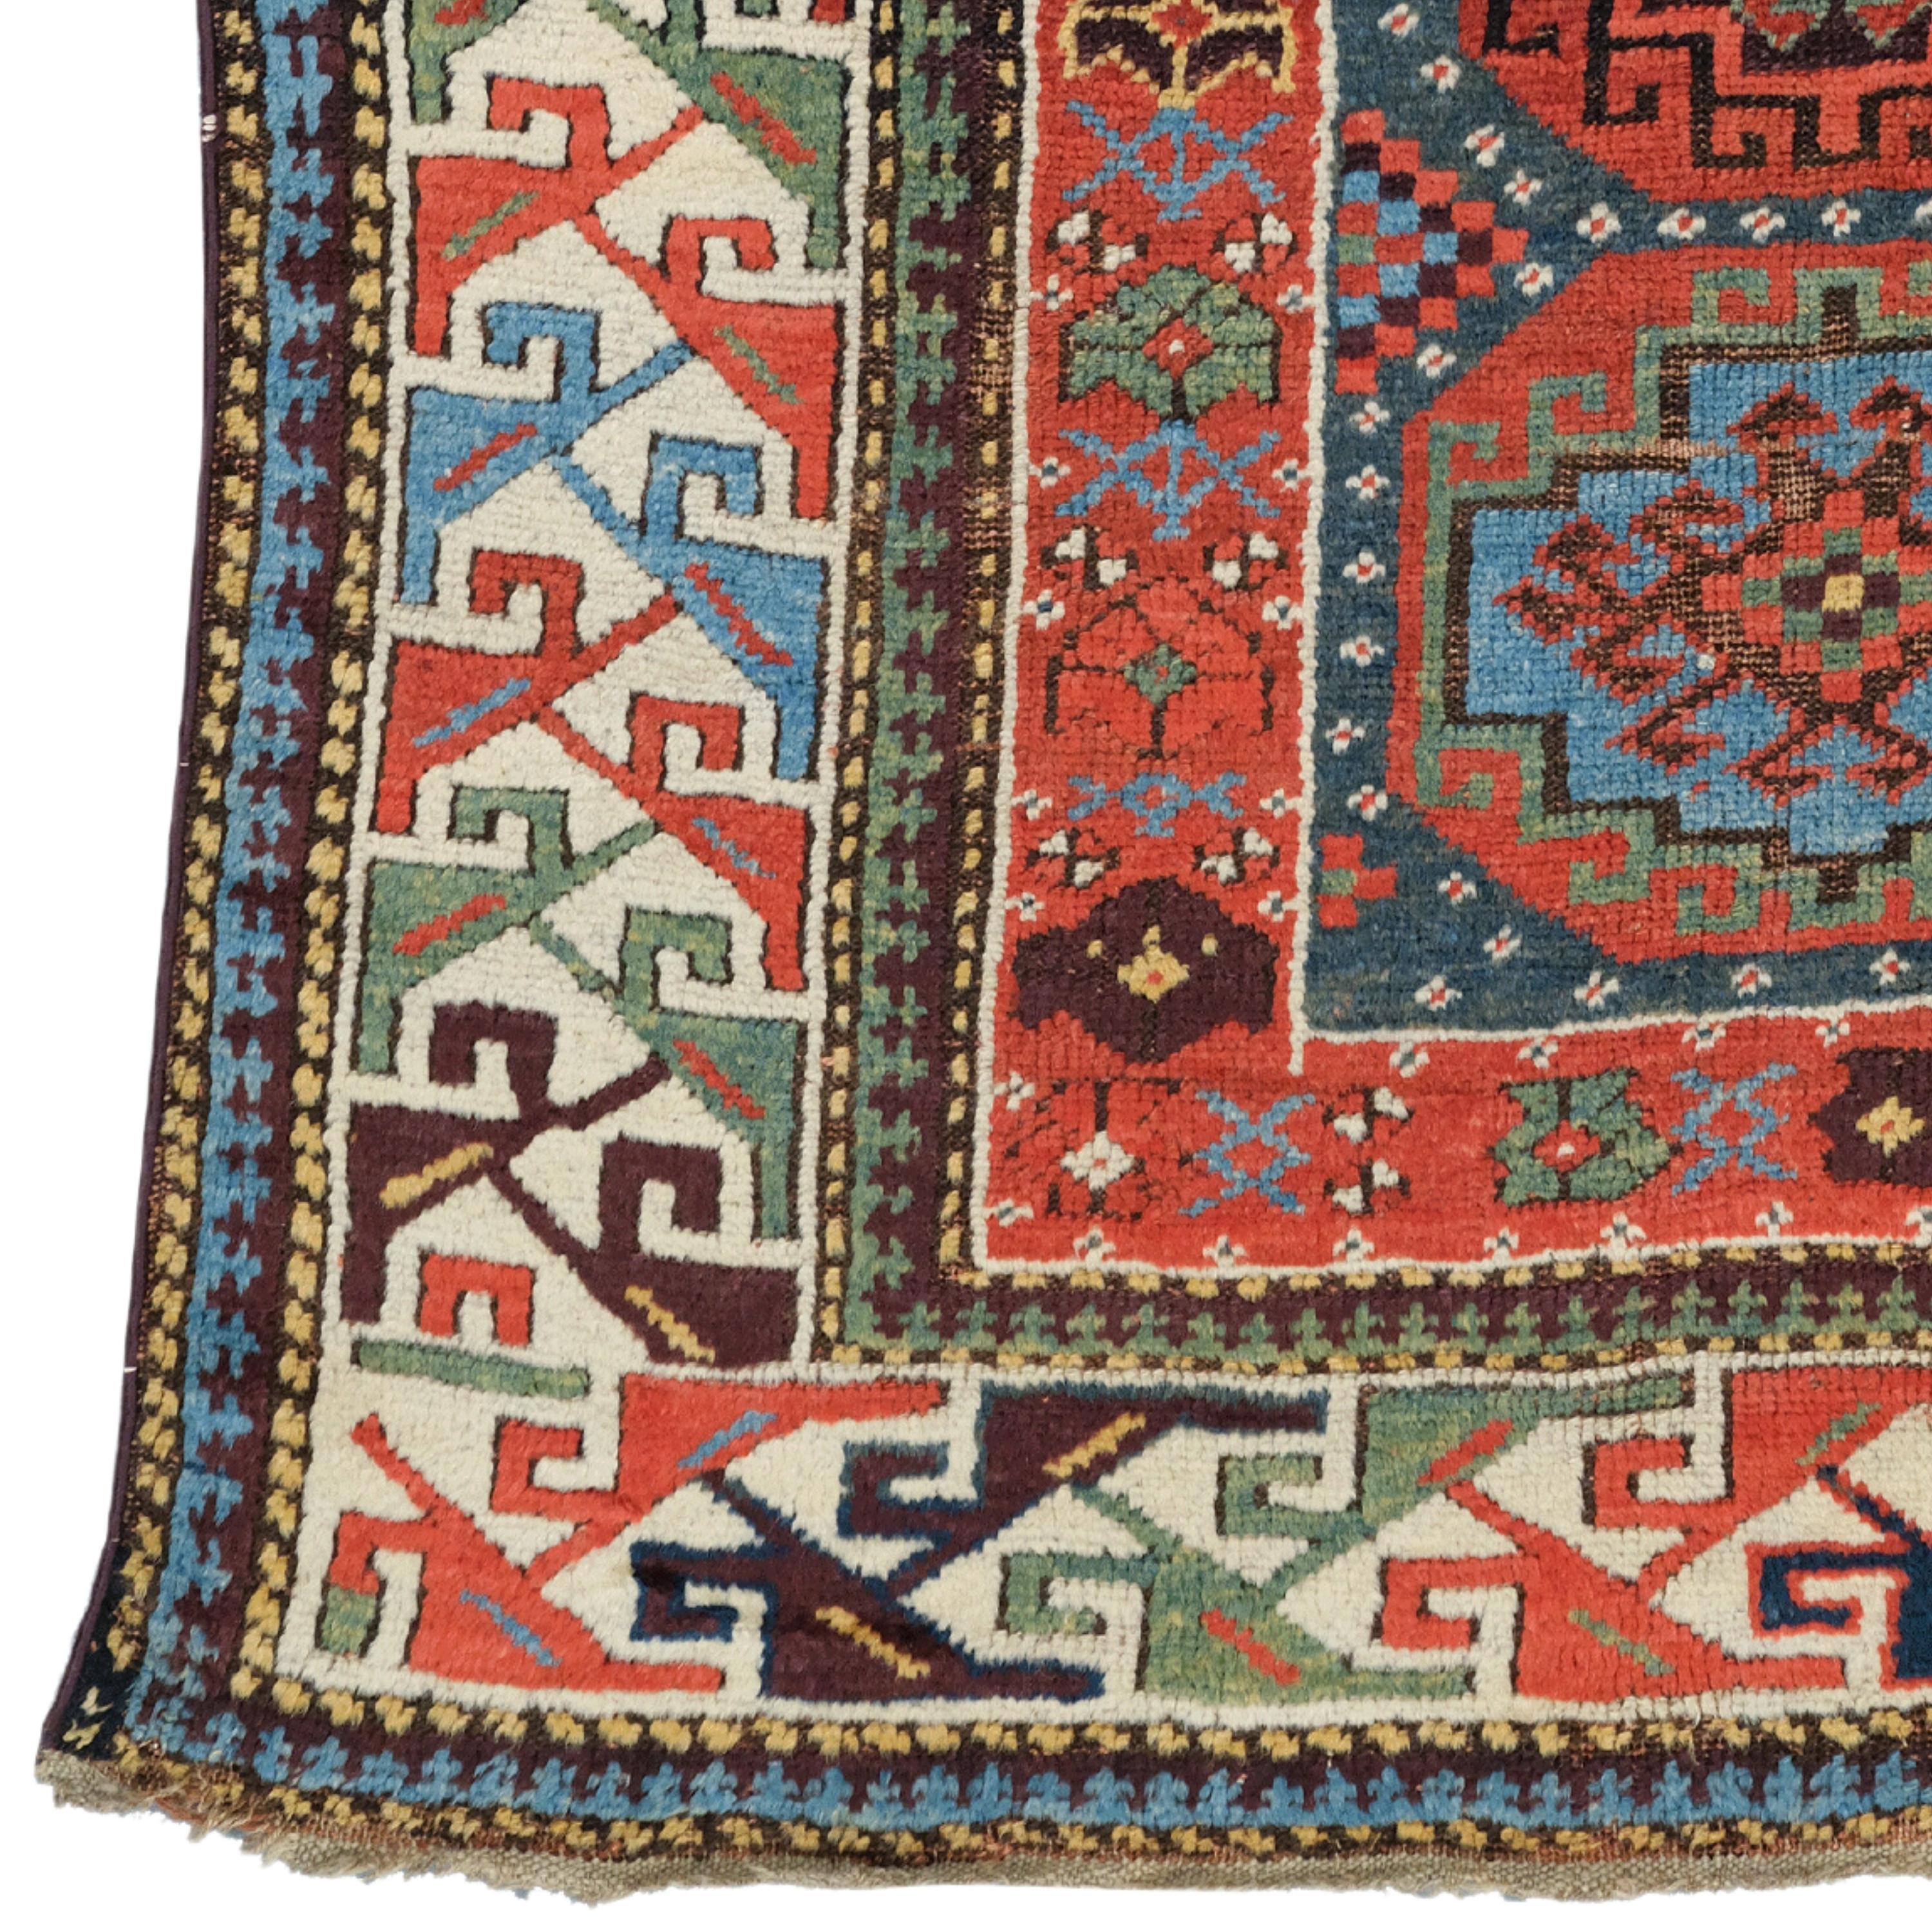 Antique Northwest Rug  Vintage Rug
19th Century Northwest Rug
Size: 112x210 cm

This carpet is a work of art woven by Azerbaijan tribes living in the Northwest in the 19th century. The dimensions of the carpet are 1.1 x 2.1 meters and it is made of